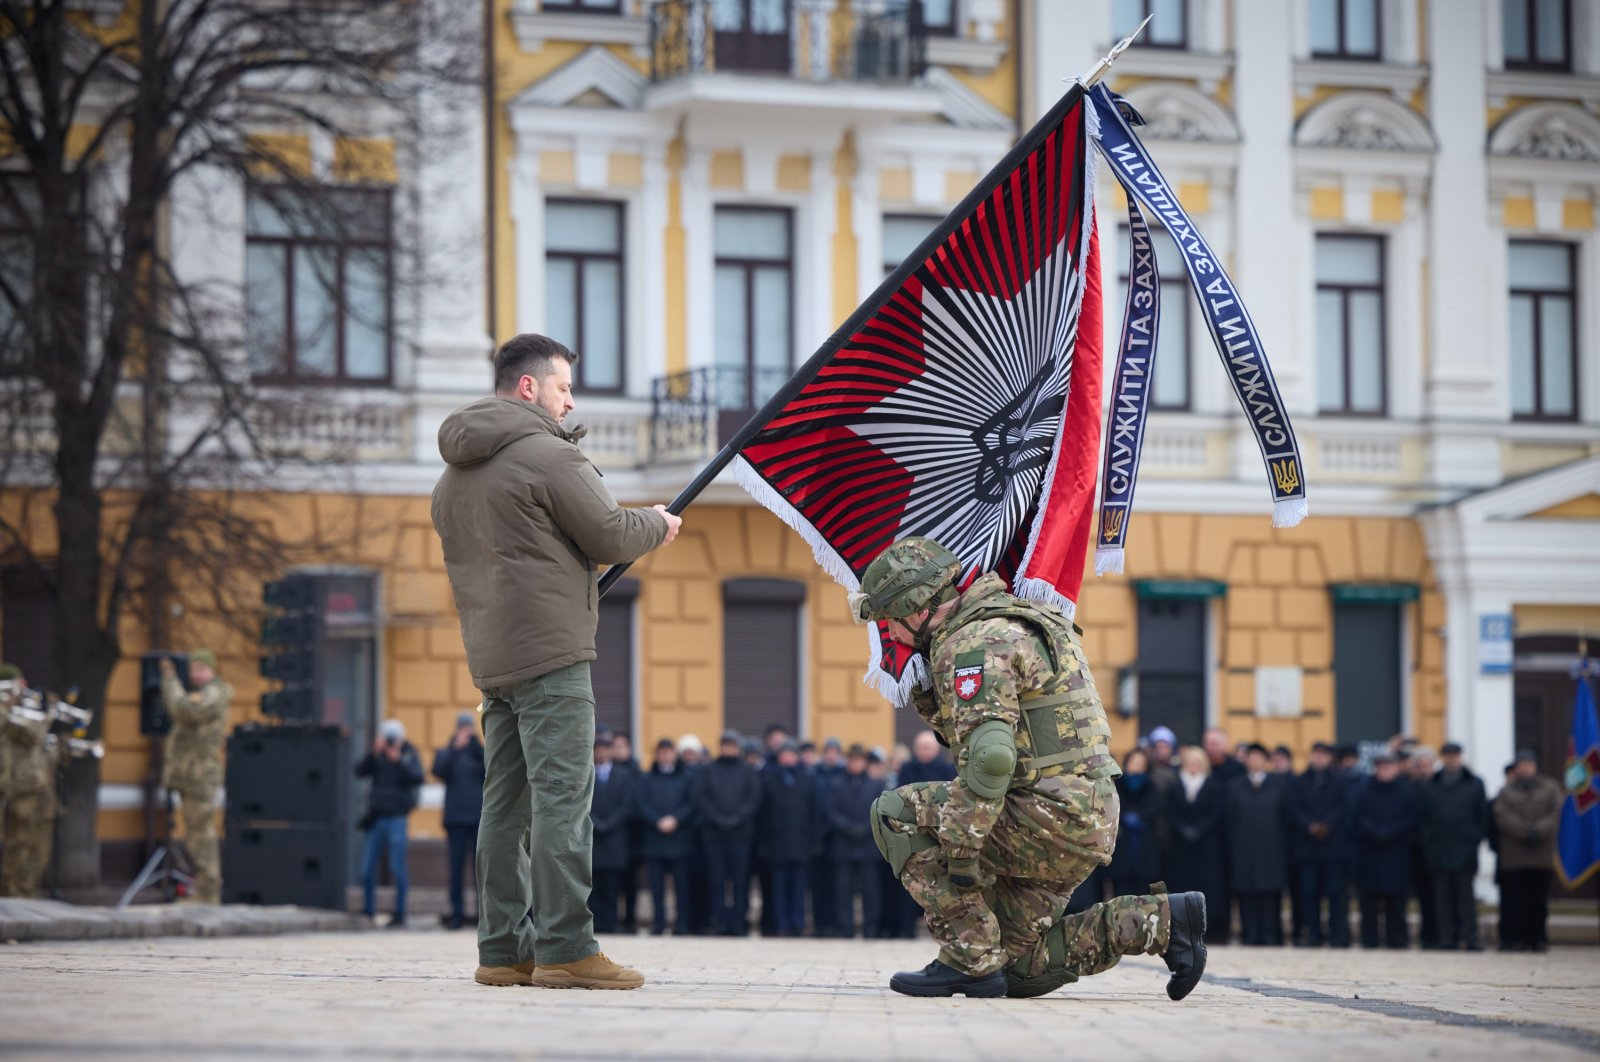 President Volodymyr Zelenskyy bestows a flag to a soldier at a ceremony in Kyiv, Ukraine, Feb. 24, 2022. (AA Photo)